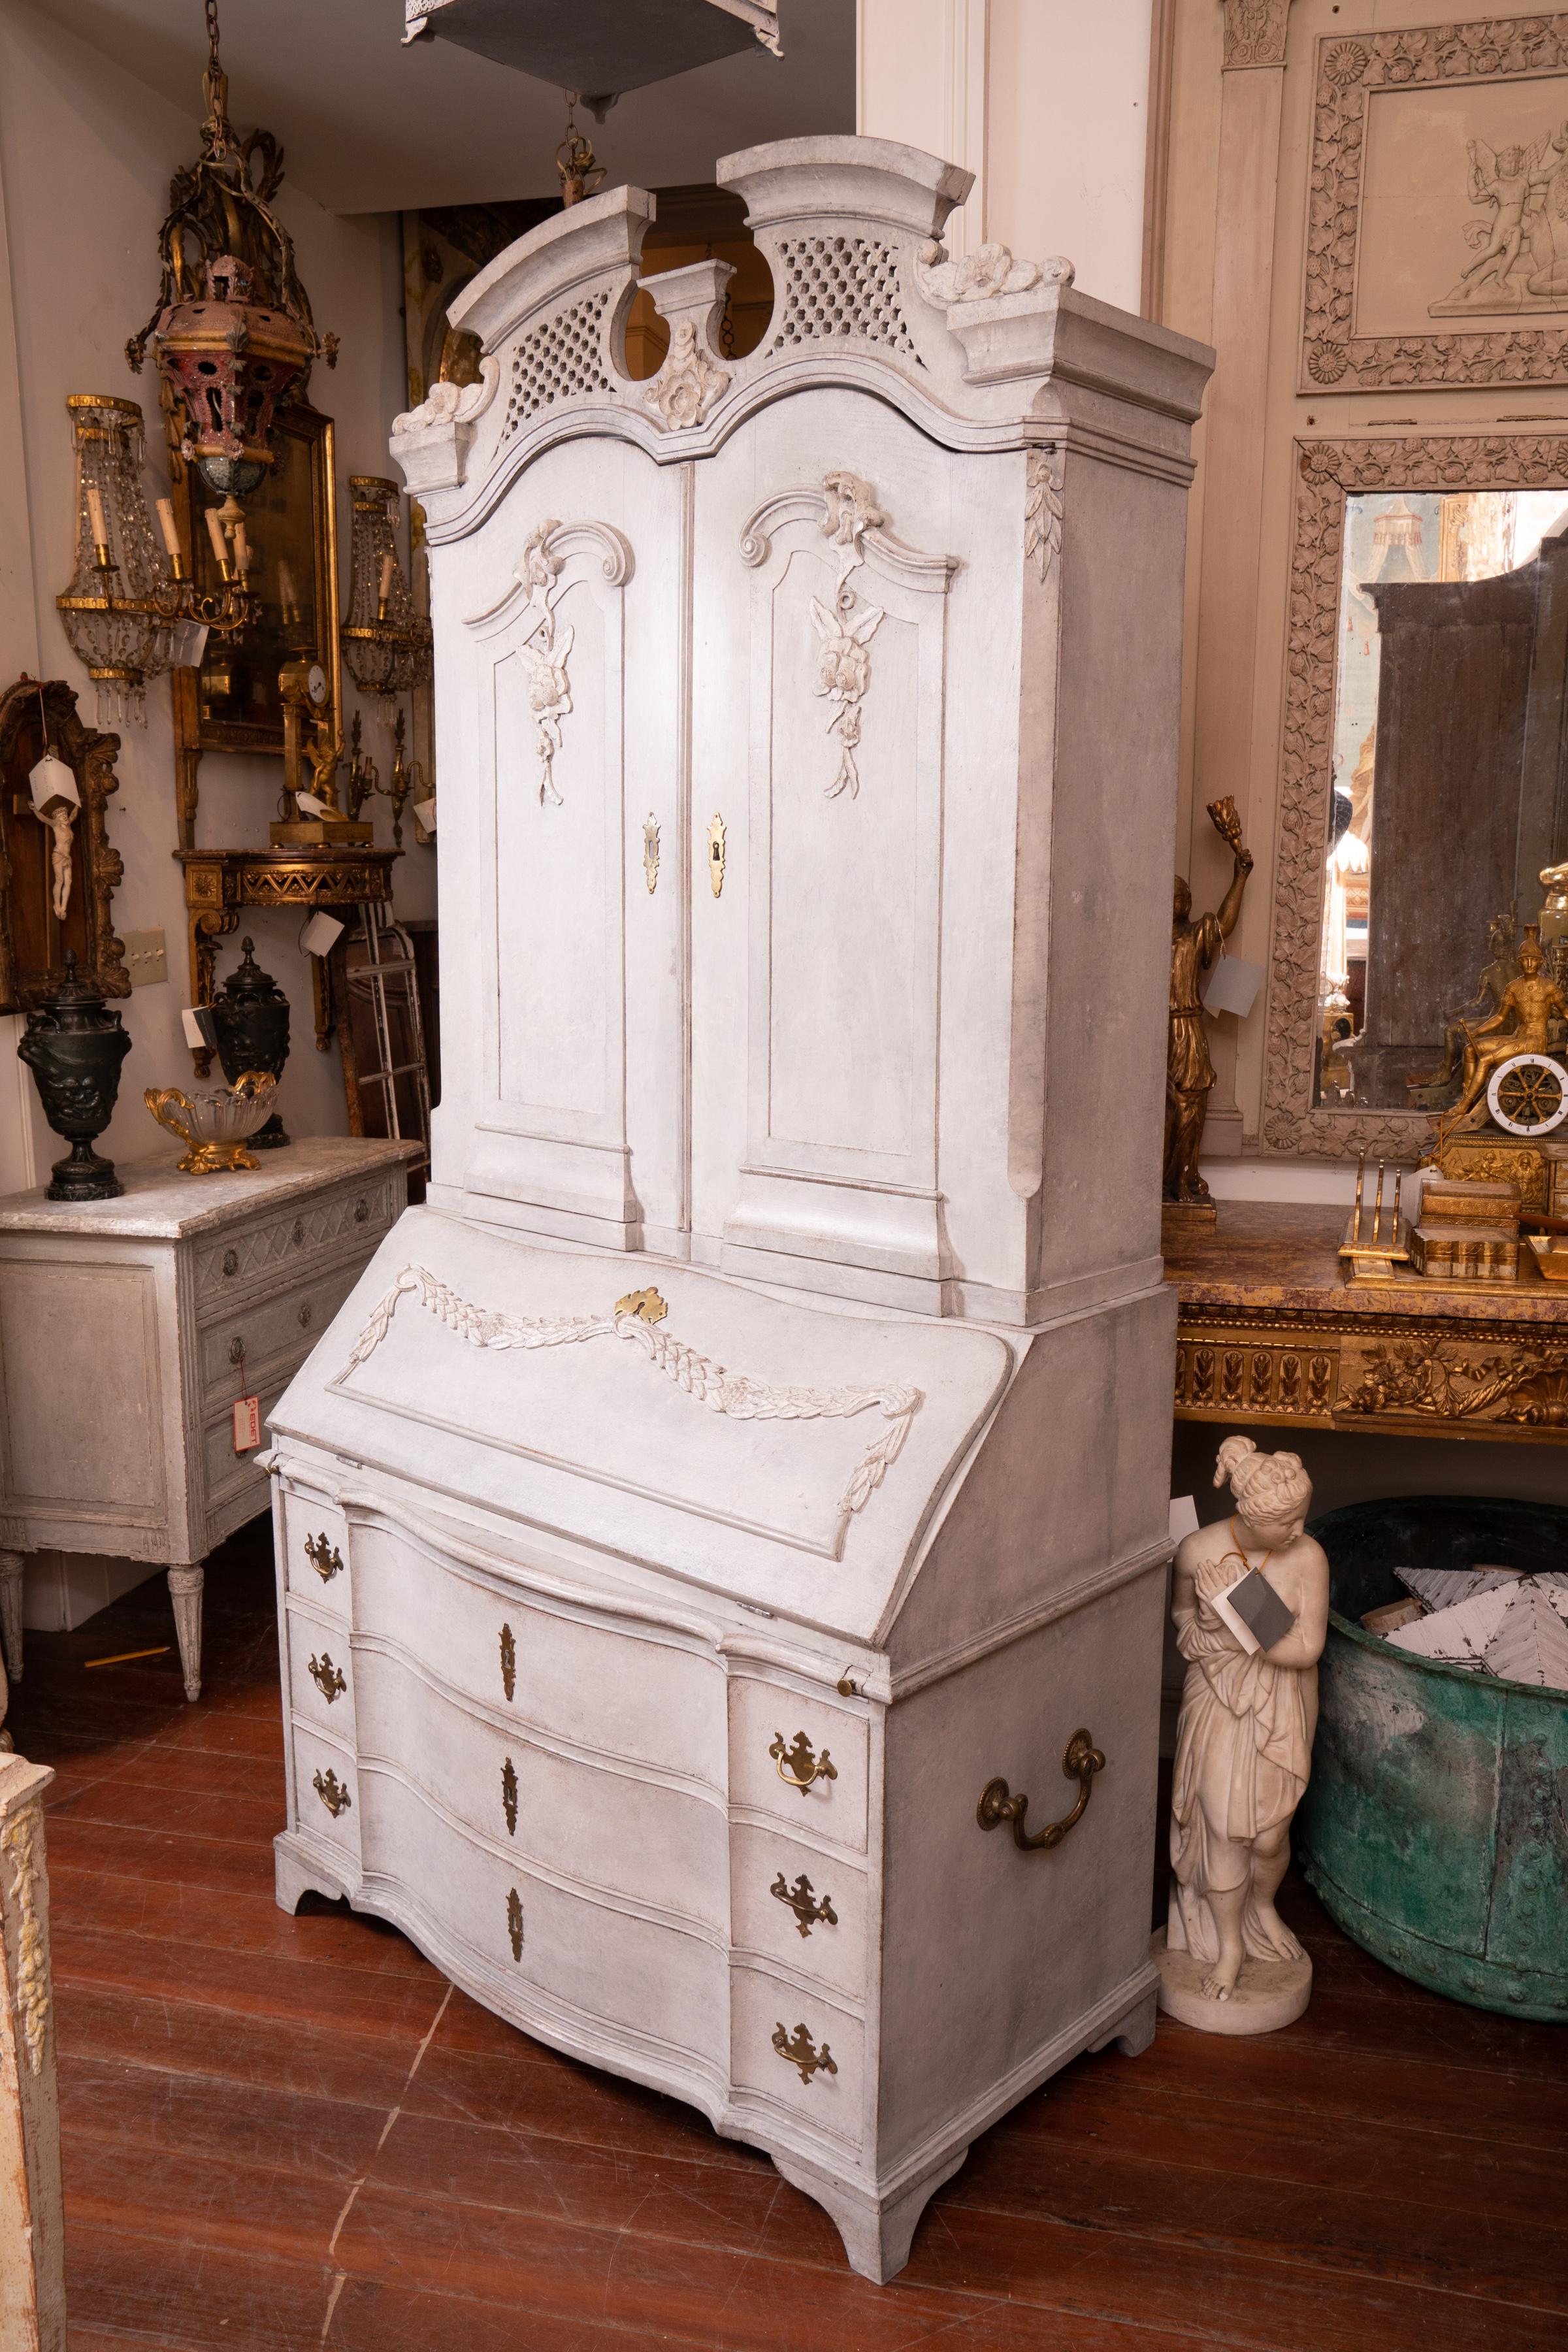 Beautifully carved and painted Gustavian Secretary. The carving is the Swedish take on French neoclassical style with the light muted paint tones to brighten up interiors during the long winters months.